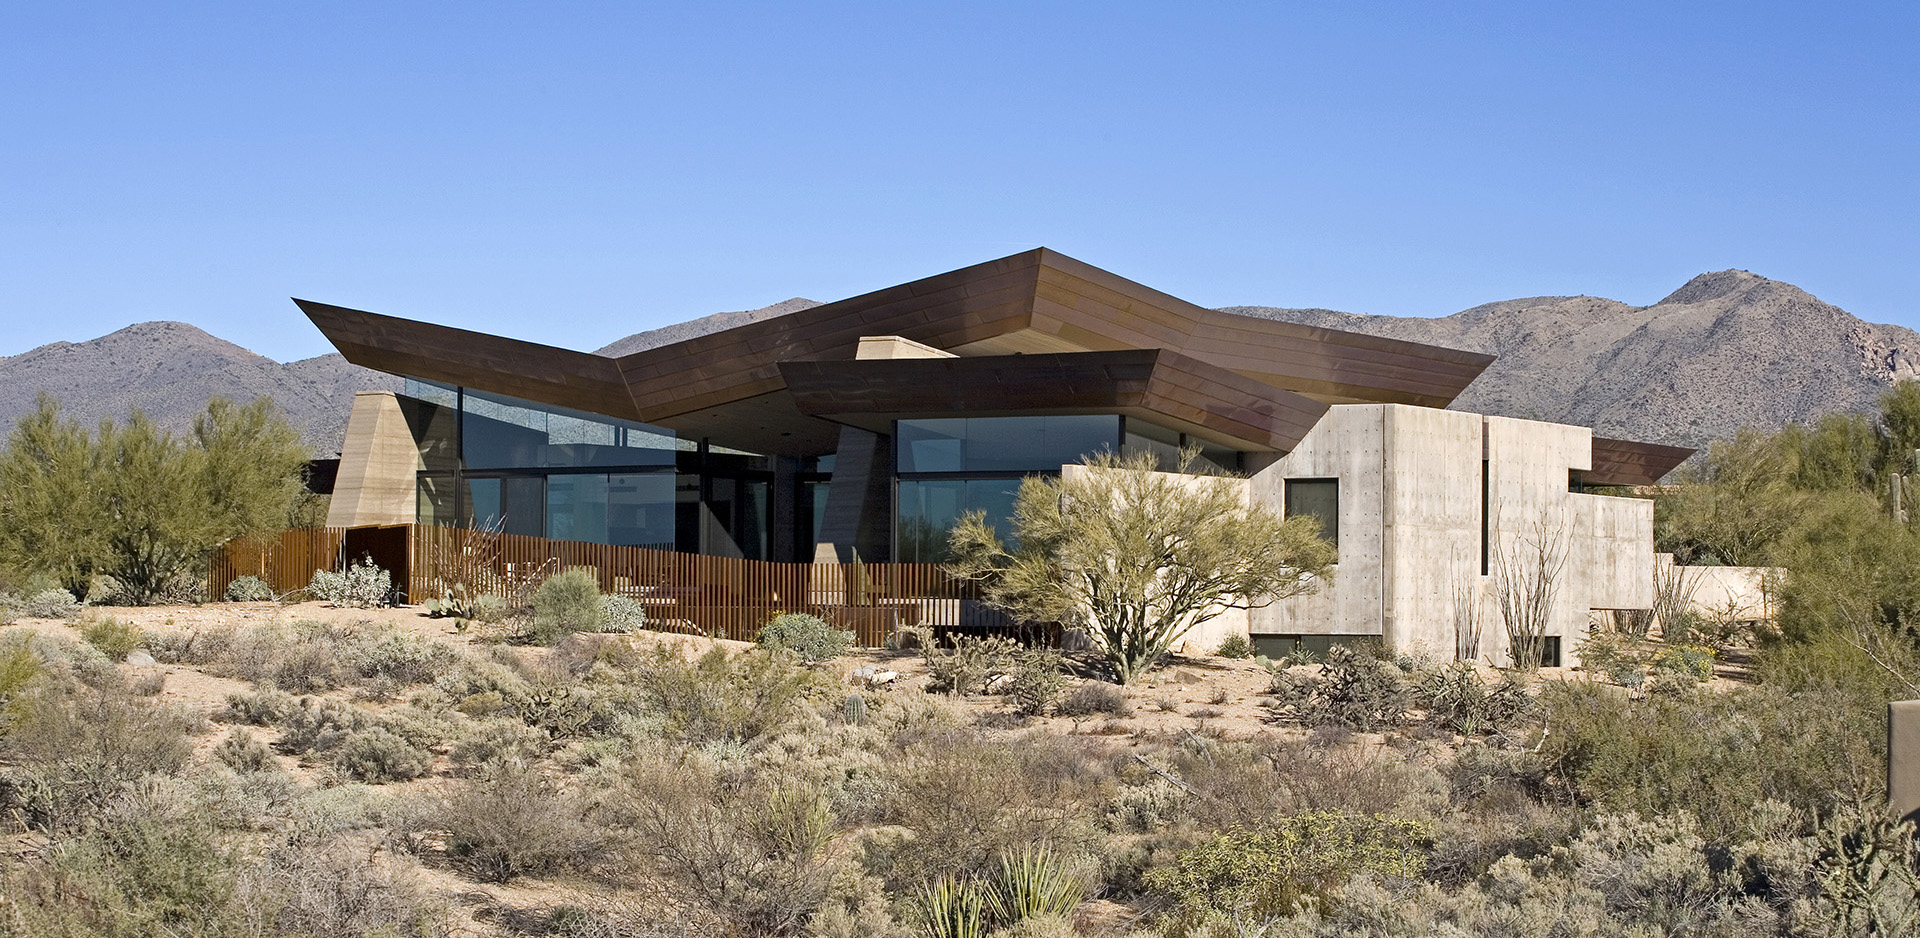 Desert Wing, a villa in the Sonora desert that echoes the surrounding landscape